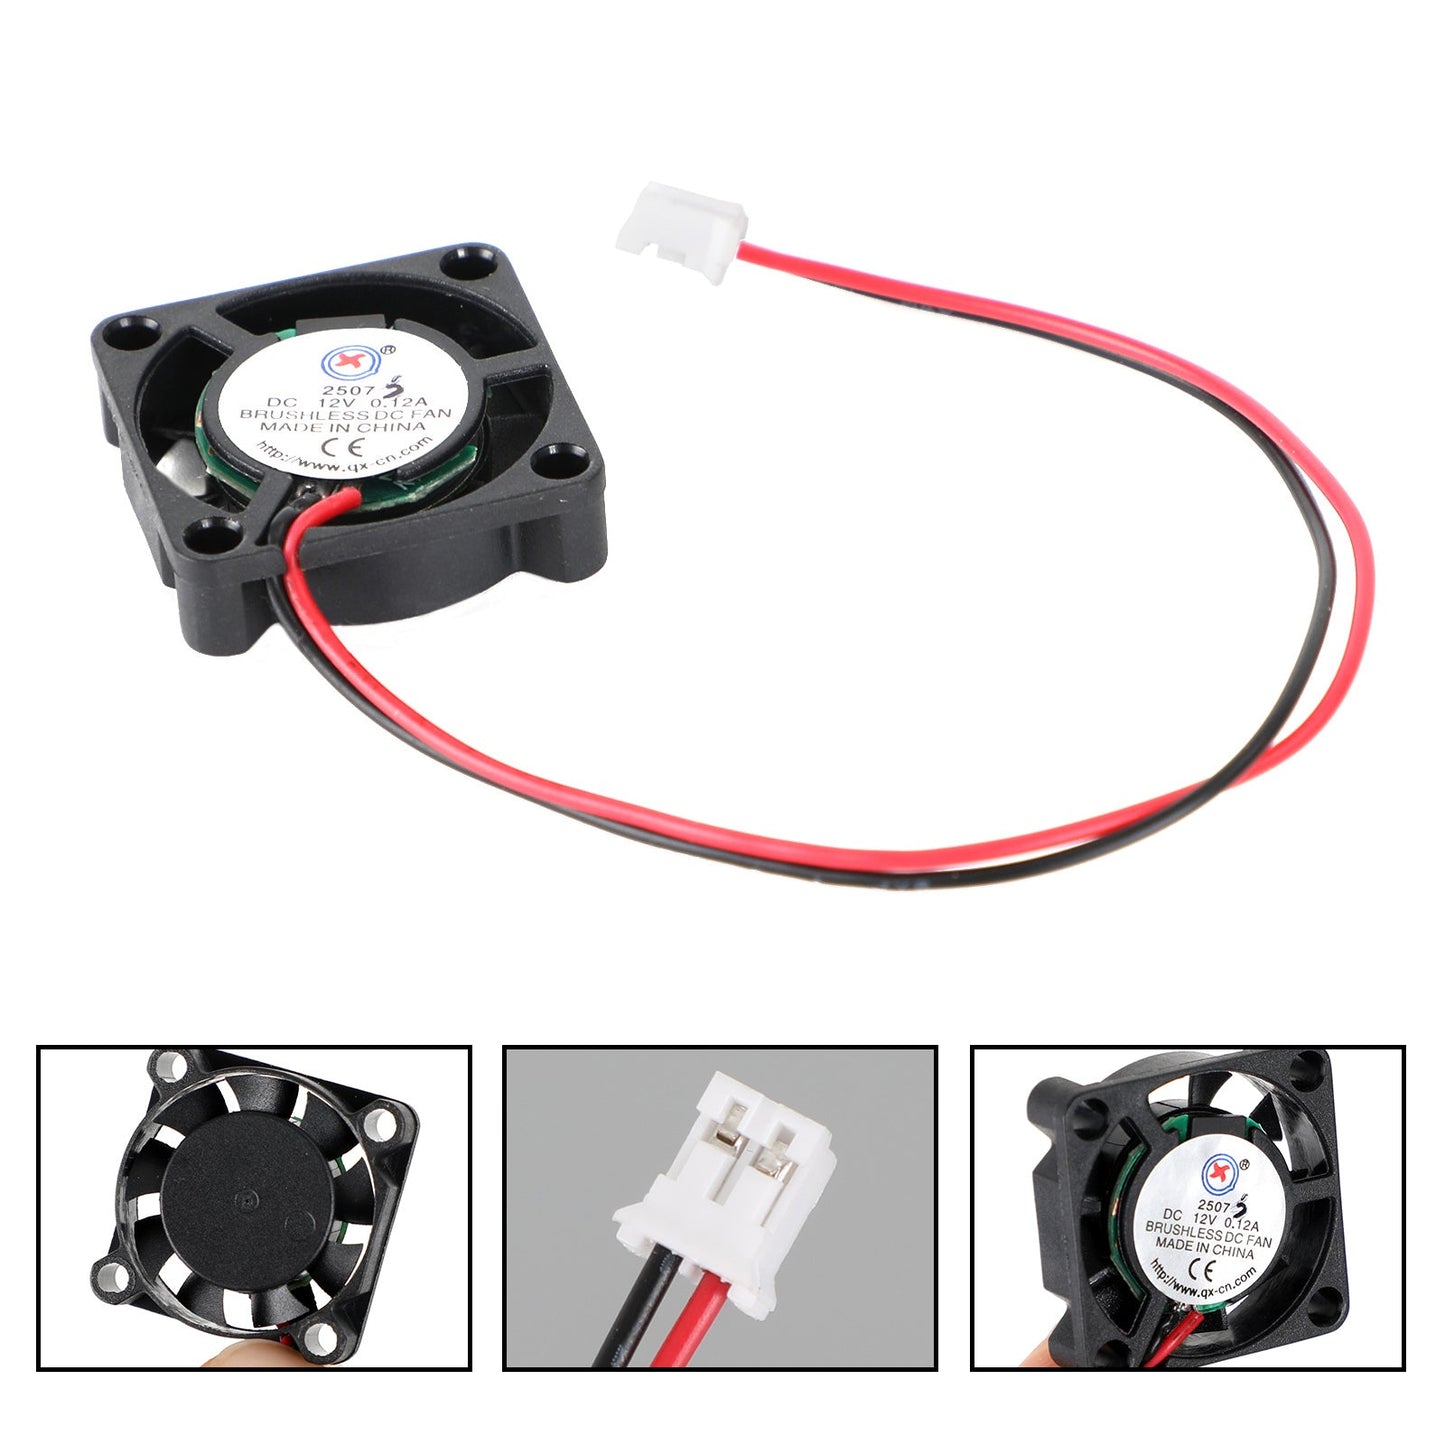 1Pc Brushless DC Cooling Blower Fan 12V 0.12A 2507S 25x25x7mm Sleeve 2 Pin Wire